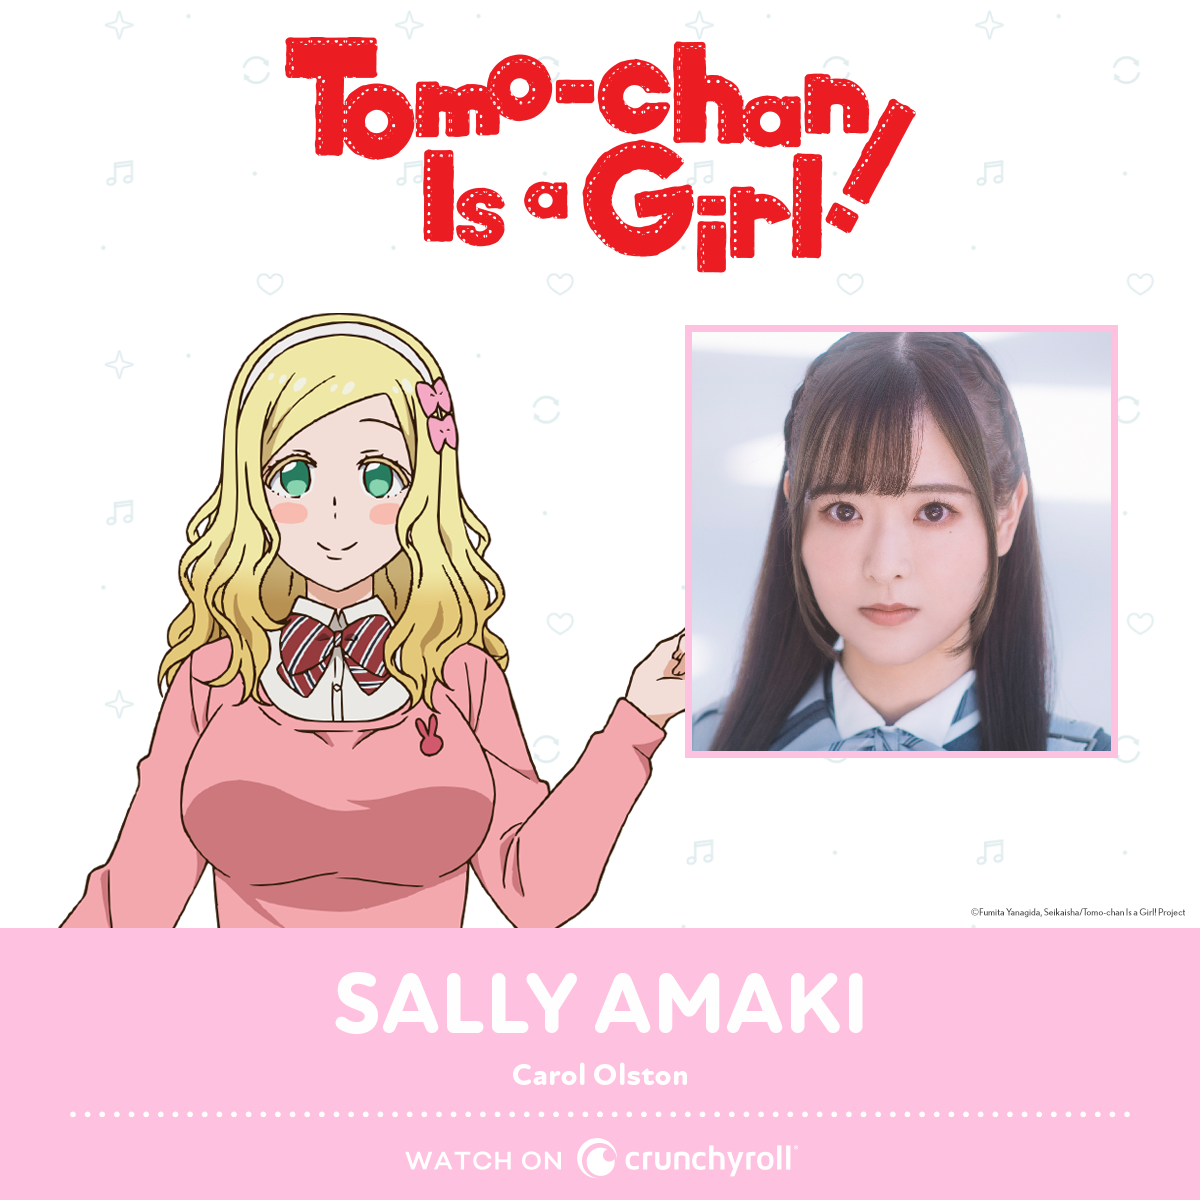 Seiyuu Corner - Sally Amaki graces the winter season by voicing Carol  Olston in both Japanese and English dubs in Tomo-chan is a Girl! 😍